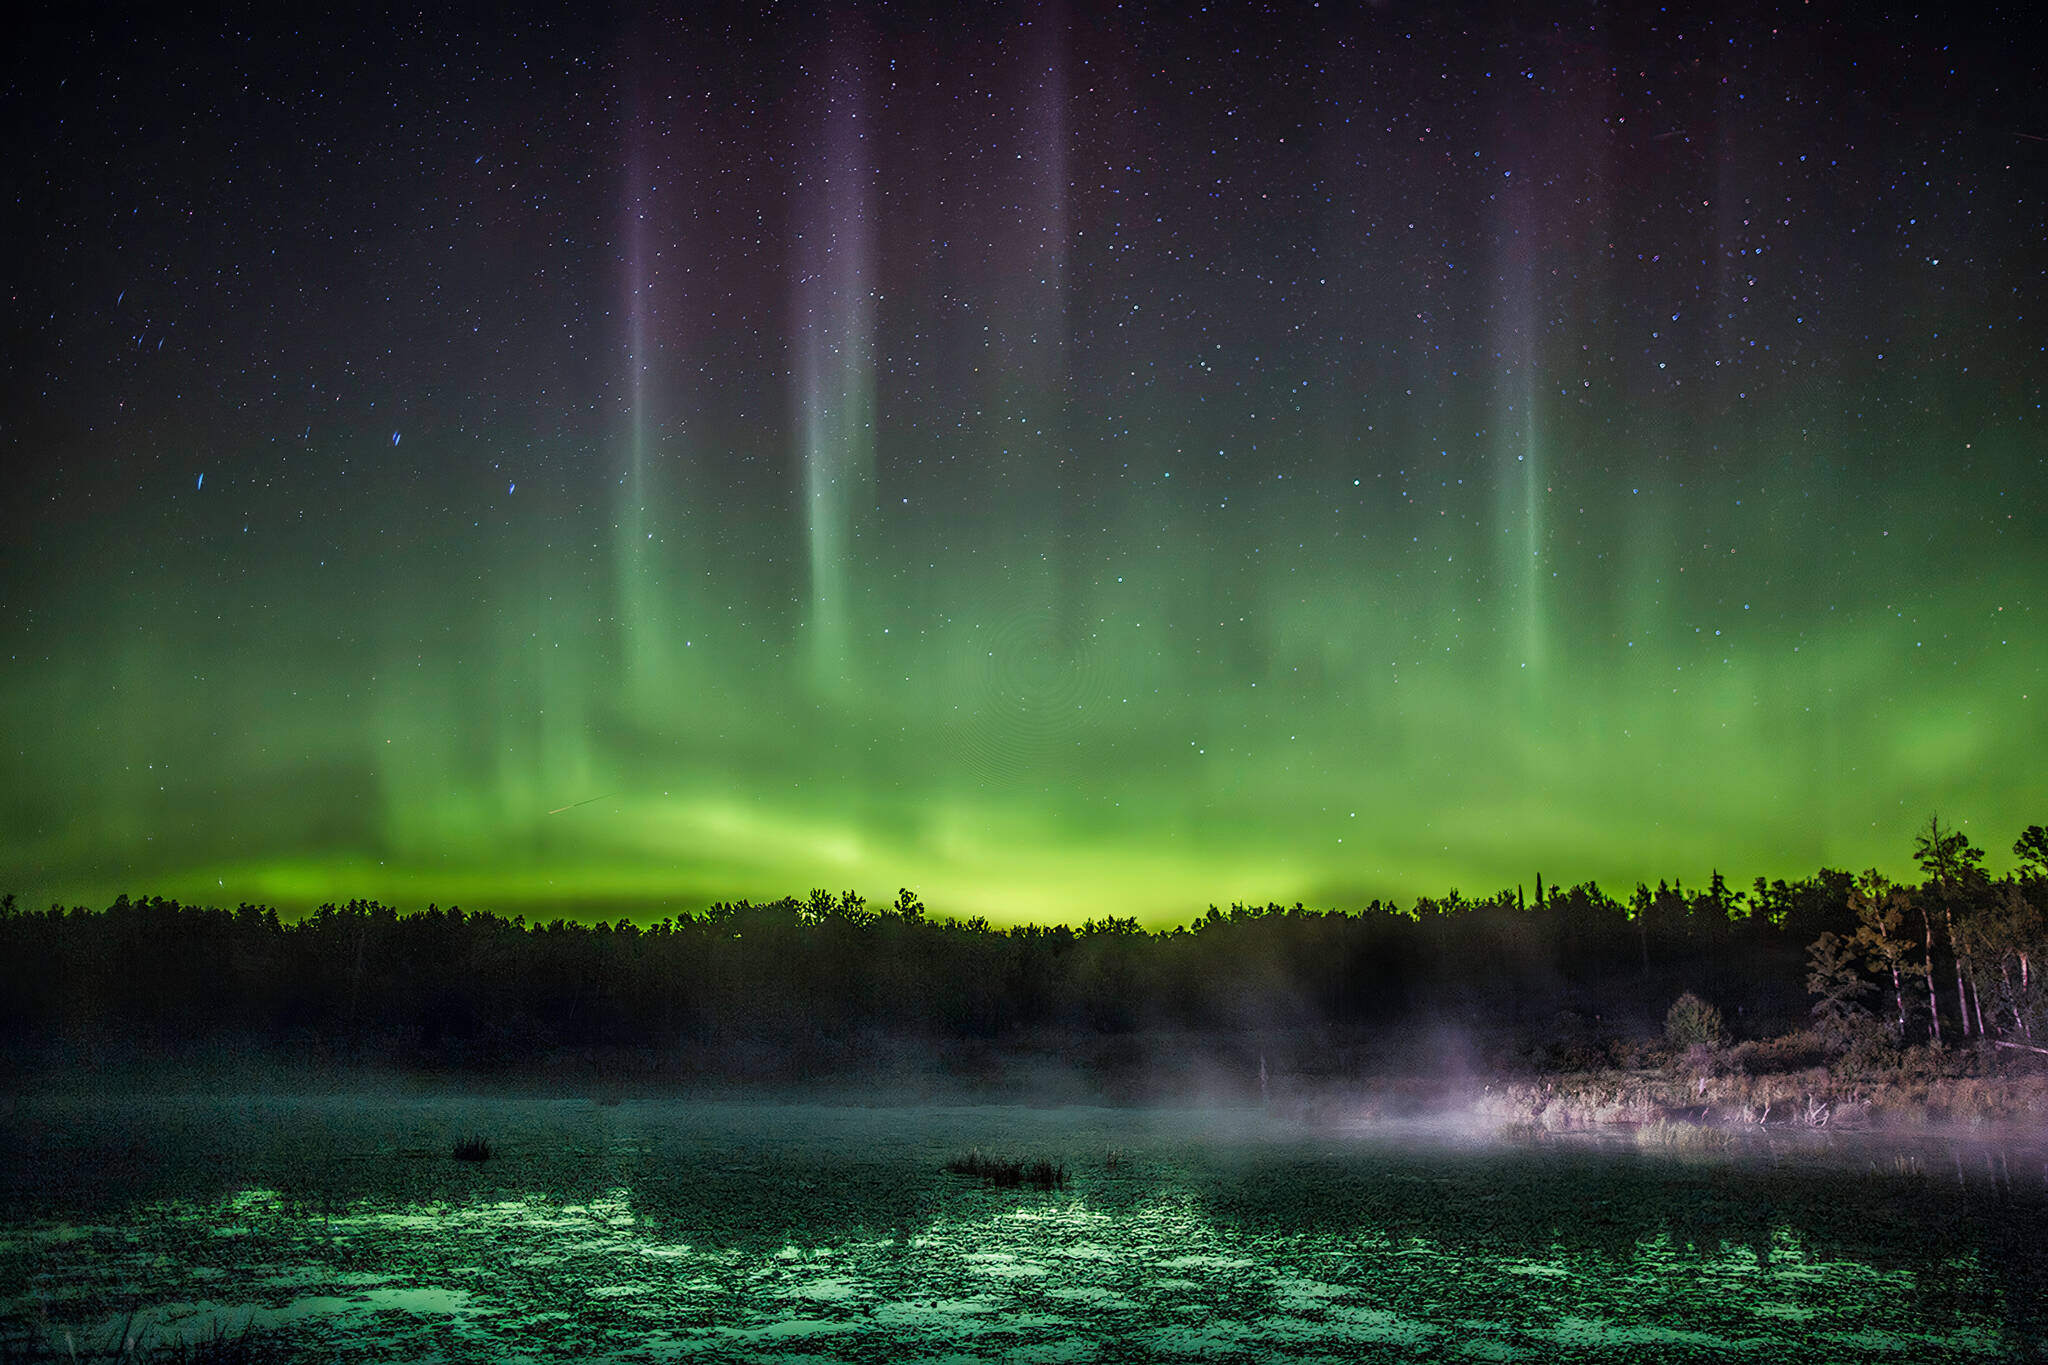 Solar flares increase chances of seeing the northern lights near Toronto